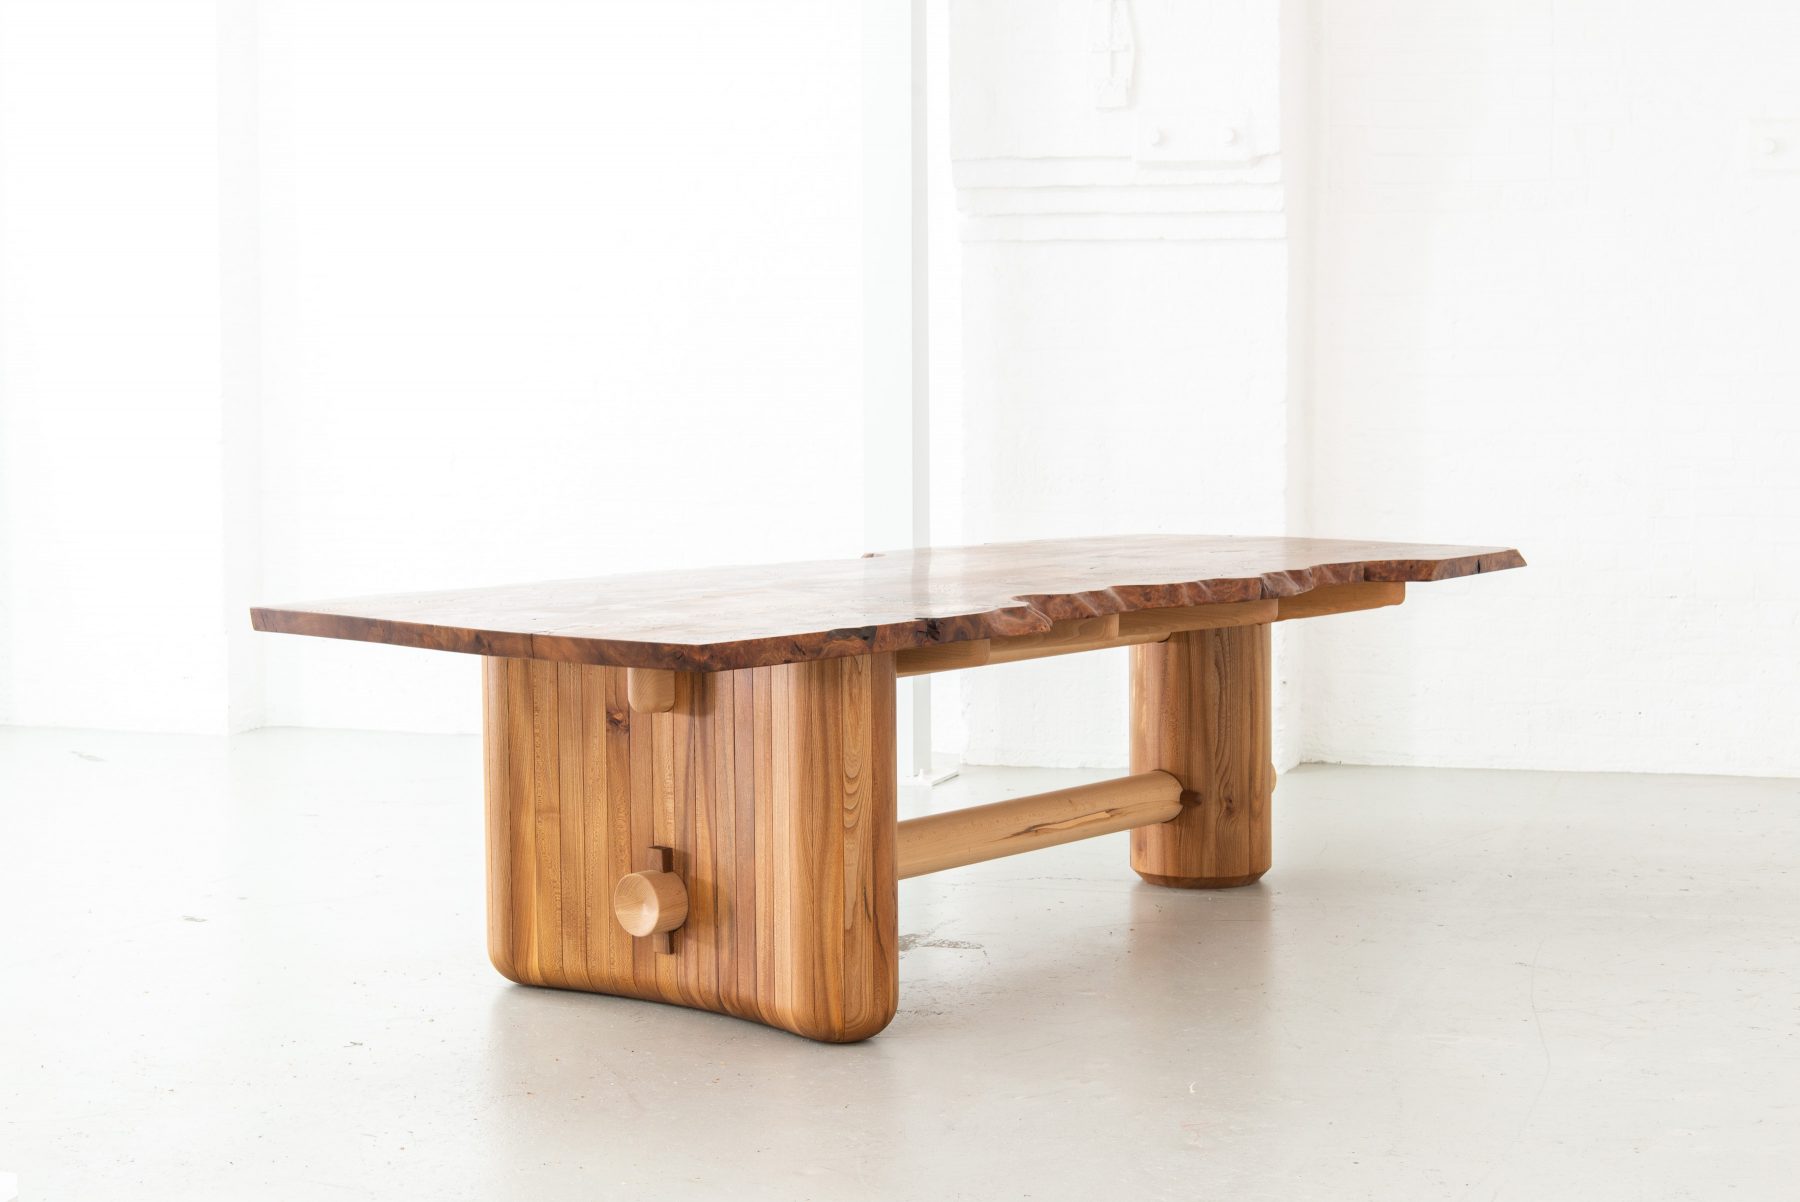 Nakashima-inspired, 12 seater table, made from highly figured Scottish Elm. Inlaid geometric pieces are used to replace surface defects. Hand carved pin-striping and profiling